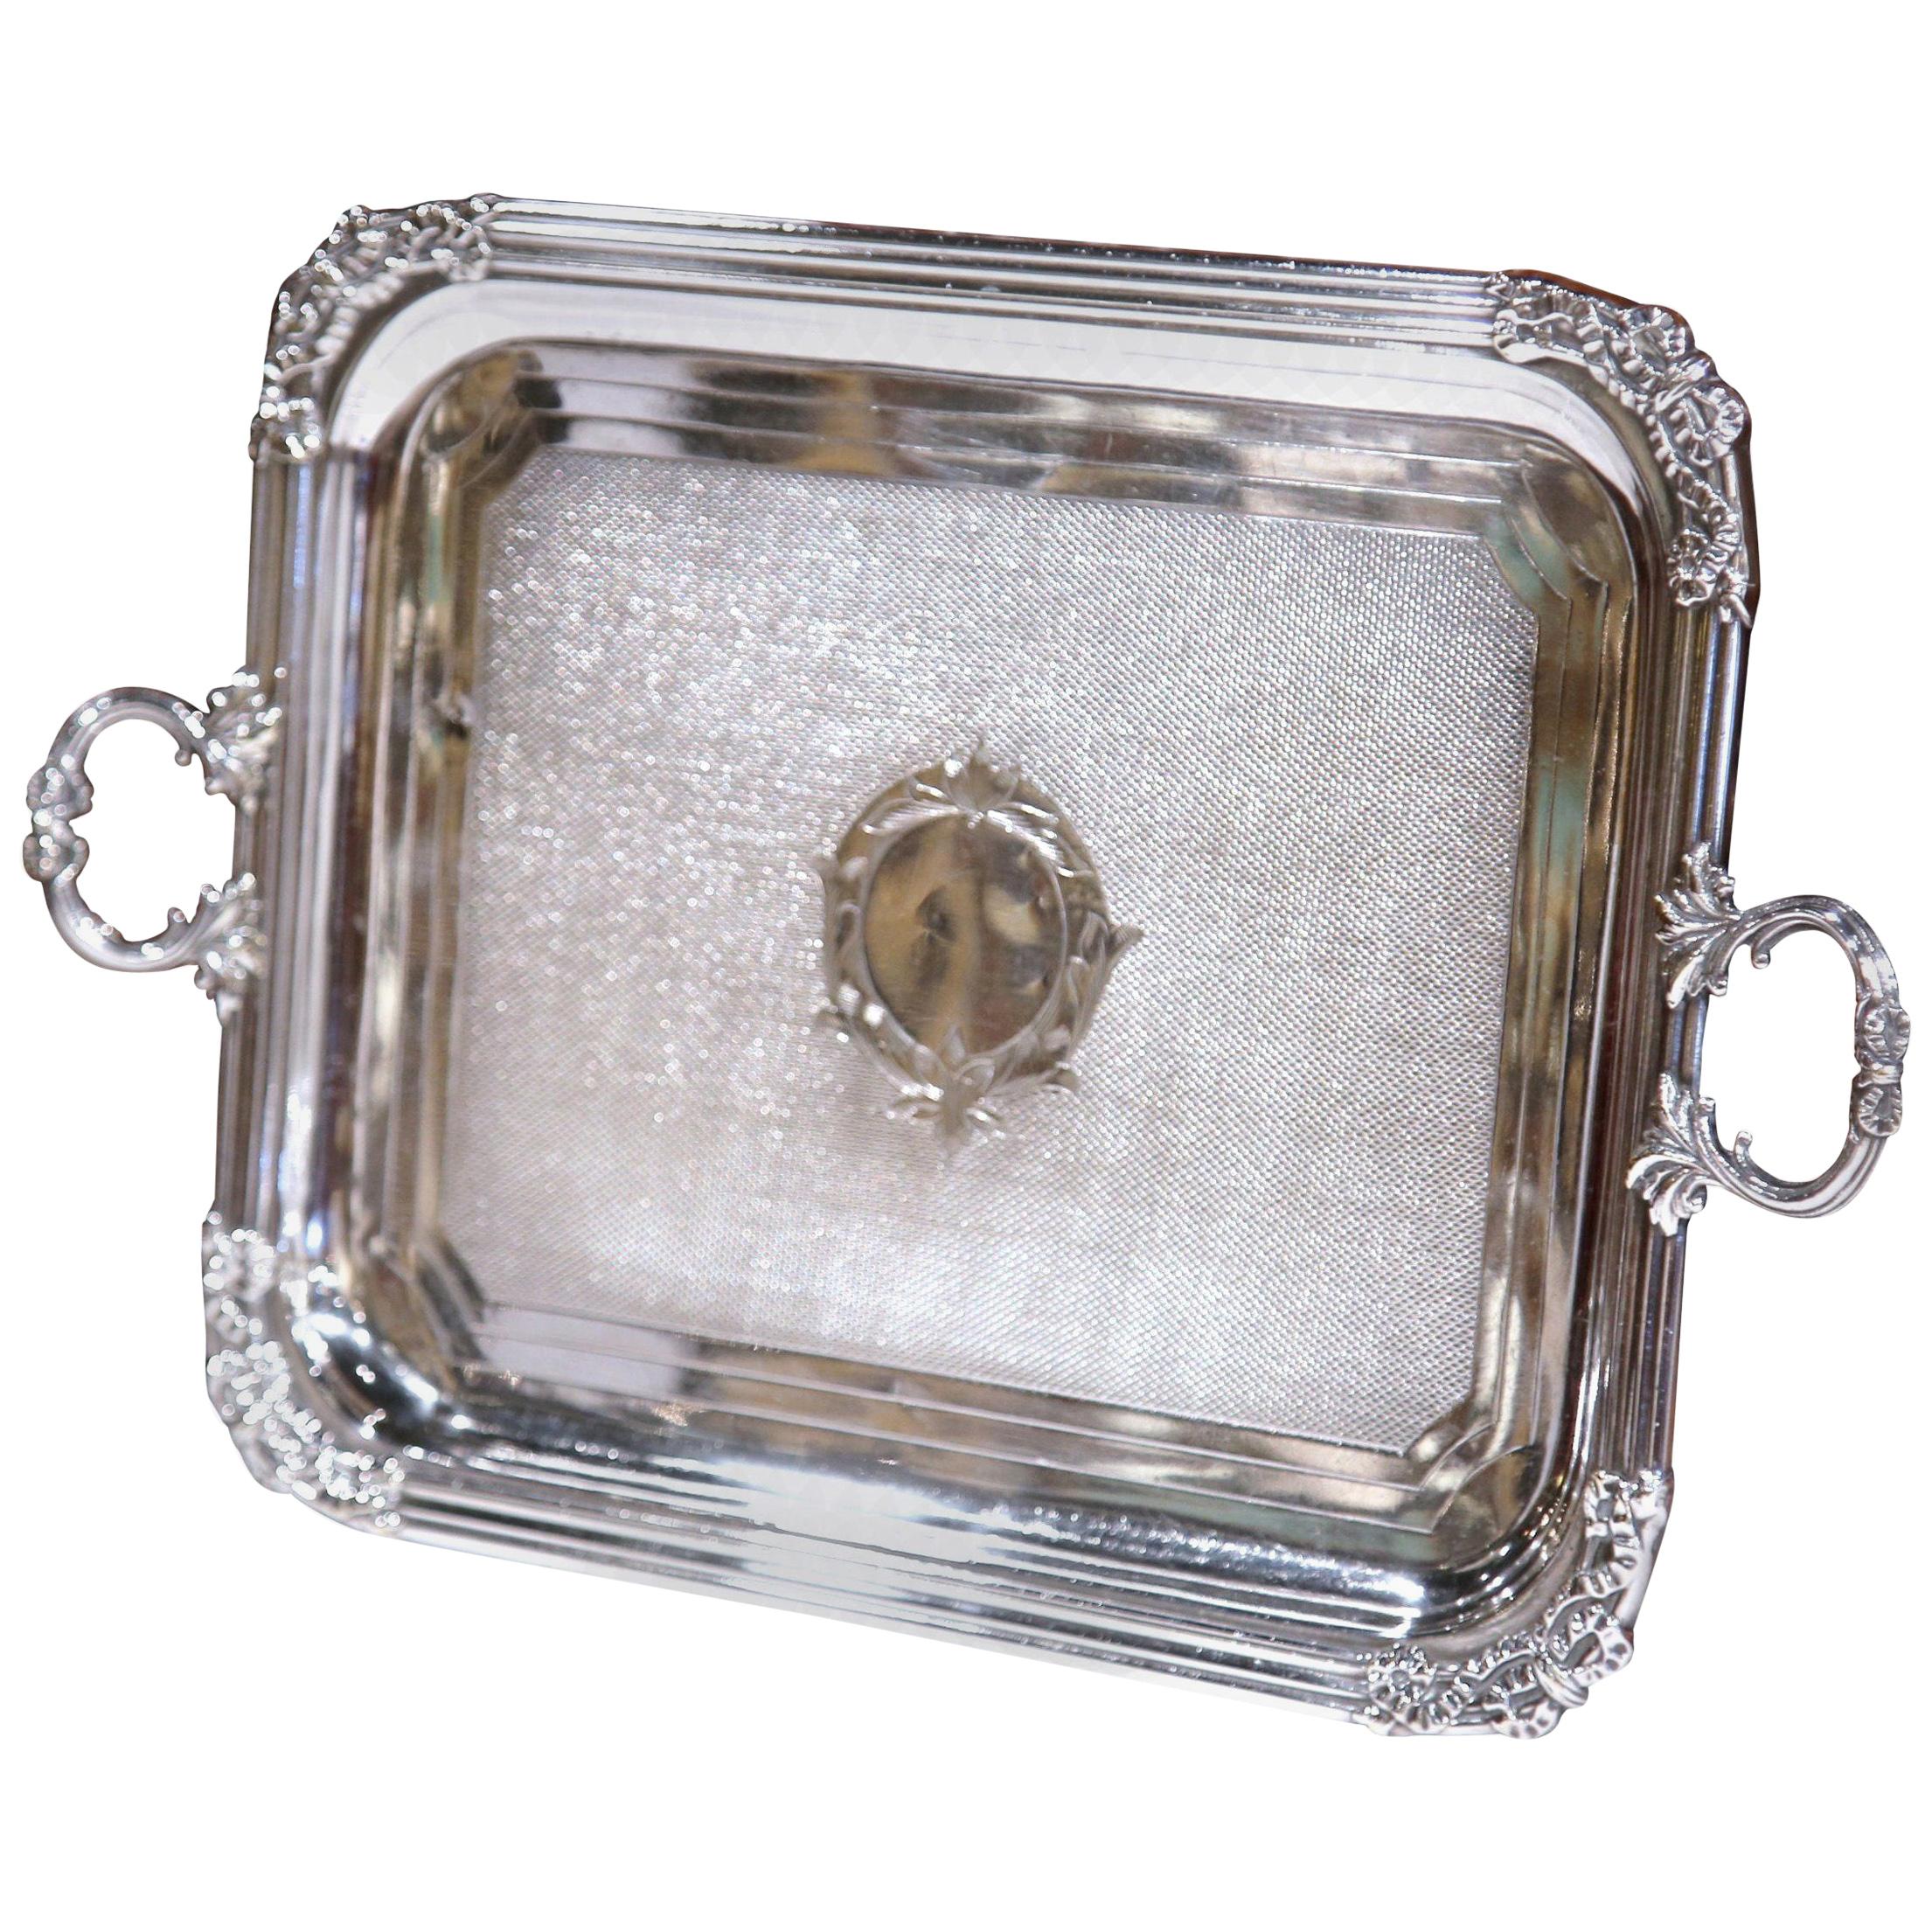 19th Century French Louis XVI Silver Plated Tray with Repousse Decor and Handles For Sale